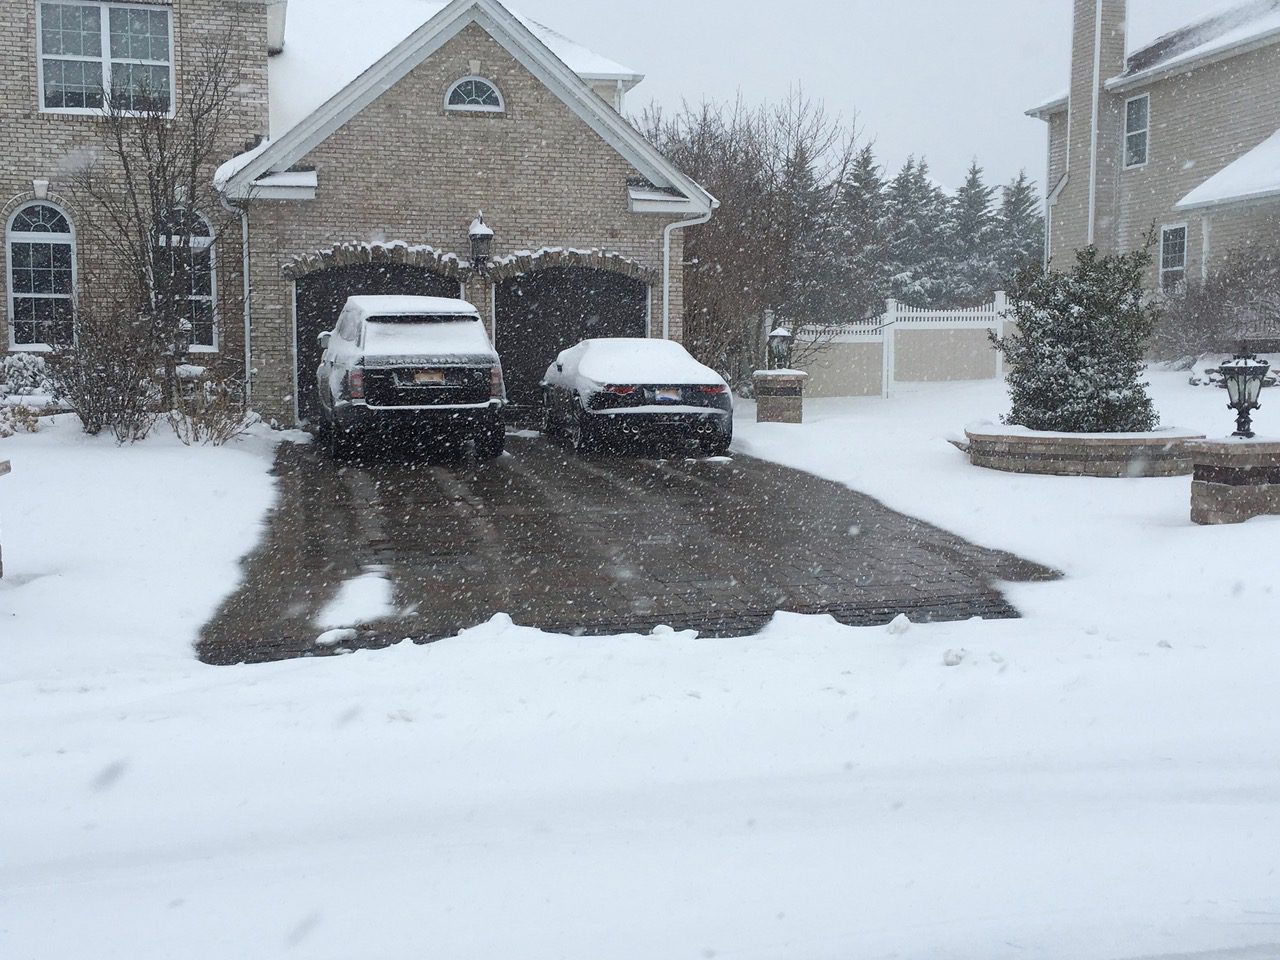 Two cars parked in a driveway covered with snow.